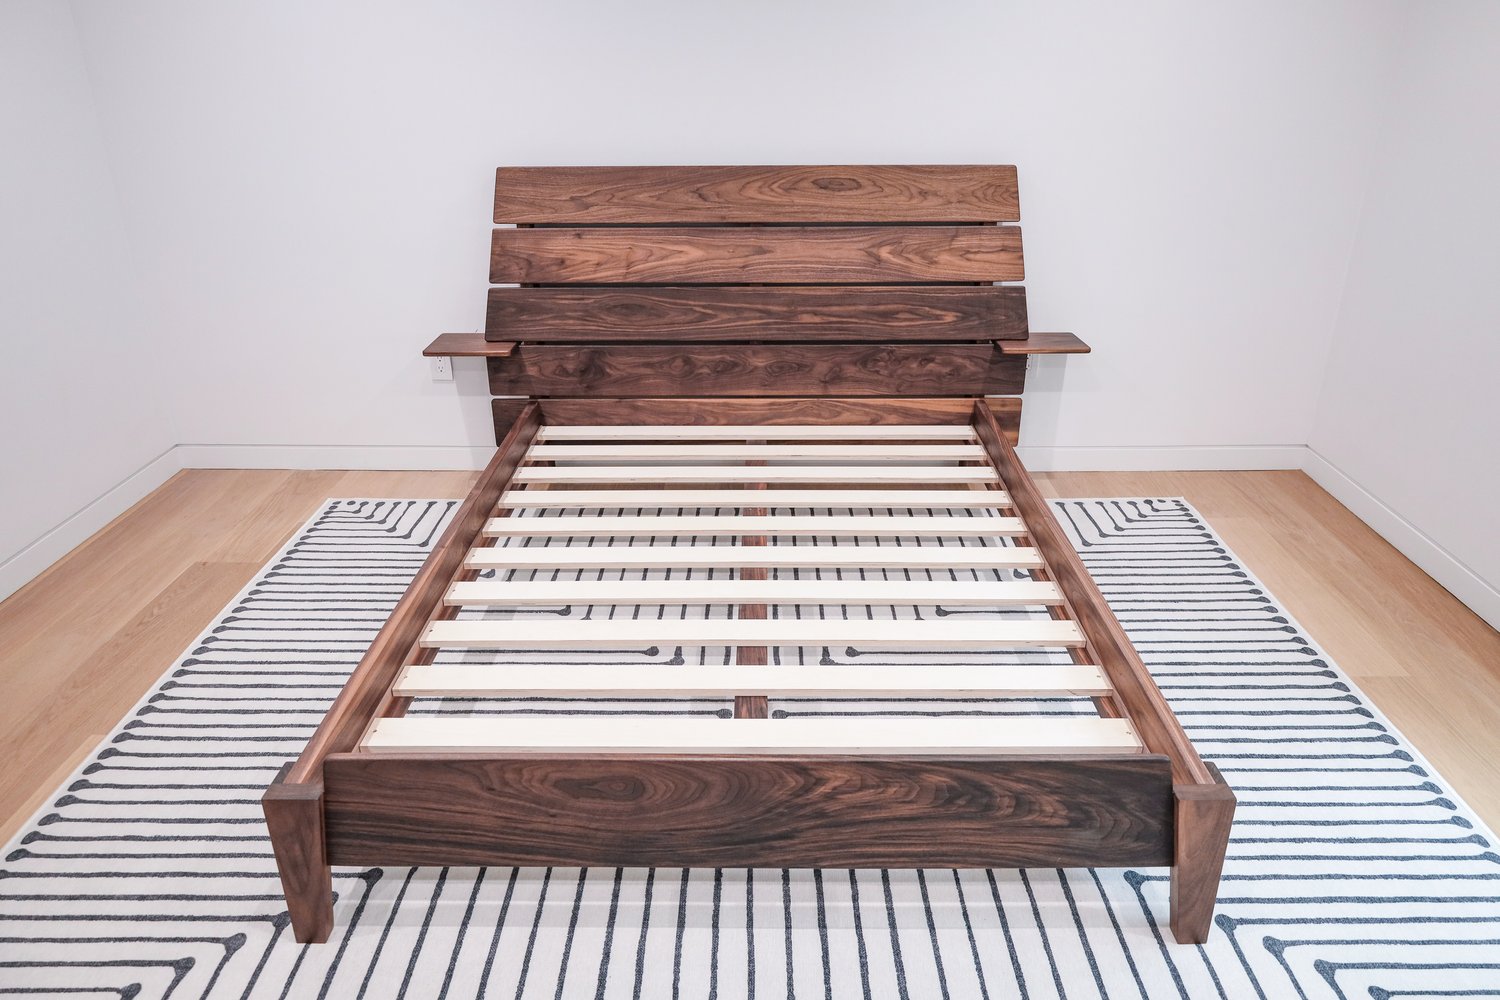 What Are Slats In A Bed